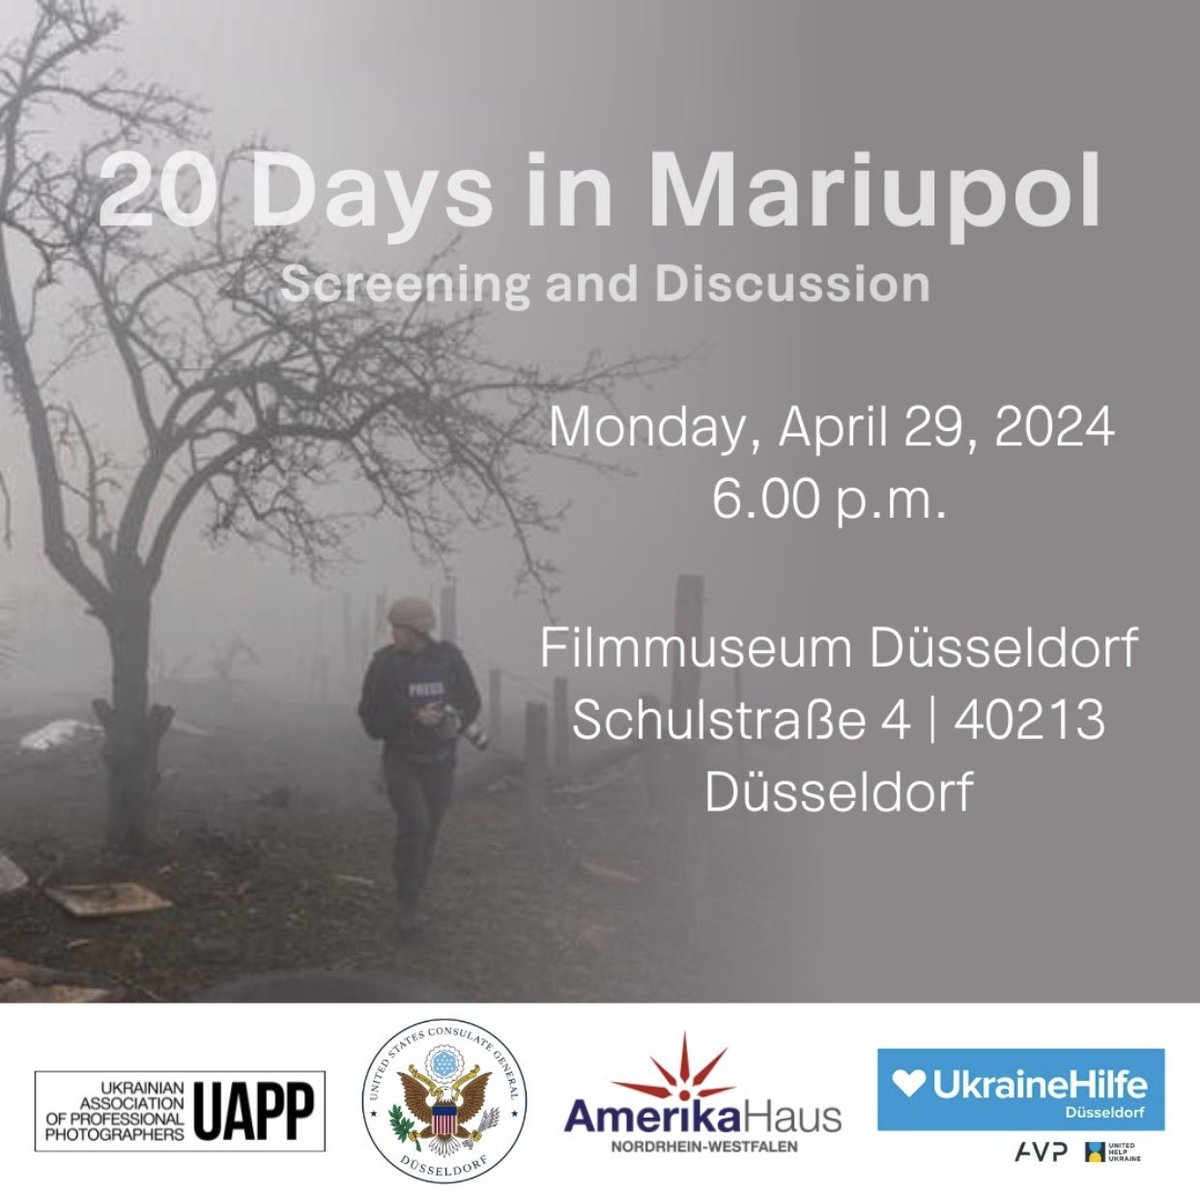 🎬 Together with the Amerikahaus NRW and the Ukrainehilfe Düsseldorf, a joint project of AVP e.V. (Germany) and @UnitedHelpUA, we cordially invite you to join us for a screening and discussion of the Academy Award winning Best Documentary Feature Film in 2024, 20 Days in…